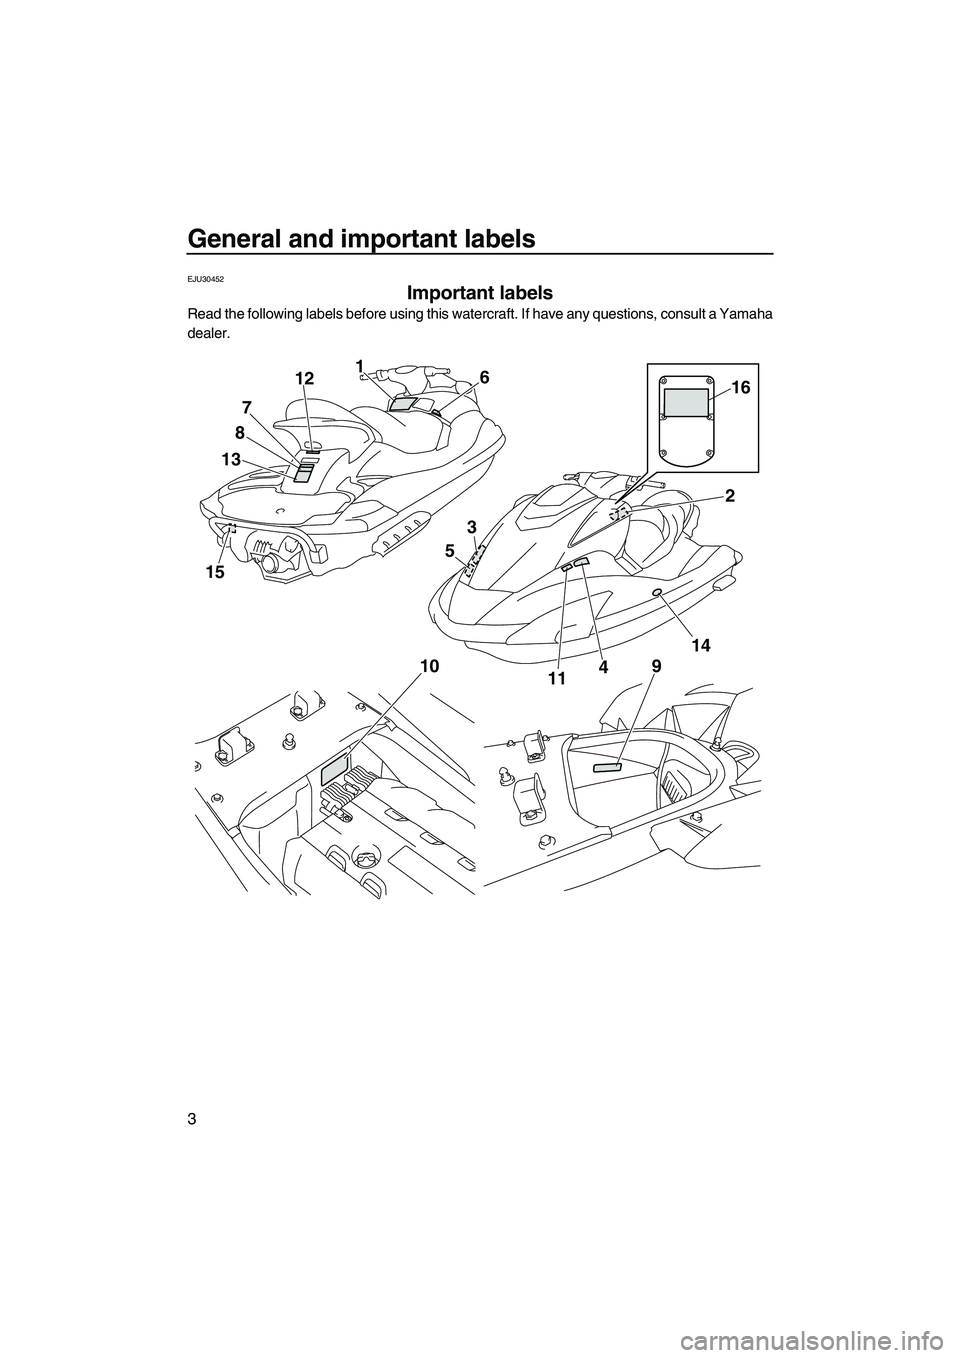 YAMAHA FX SHO 2010  Owners Manual General and important labels
3
EJU30452
Important labels 
Read the following labels before using this watercraft. If have any questions, consult a Yamaha
dealer.
15
1387121
6
4
10914216
3
511
UF1W72E0